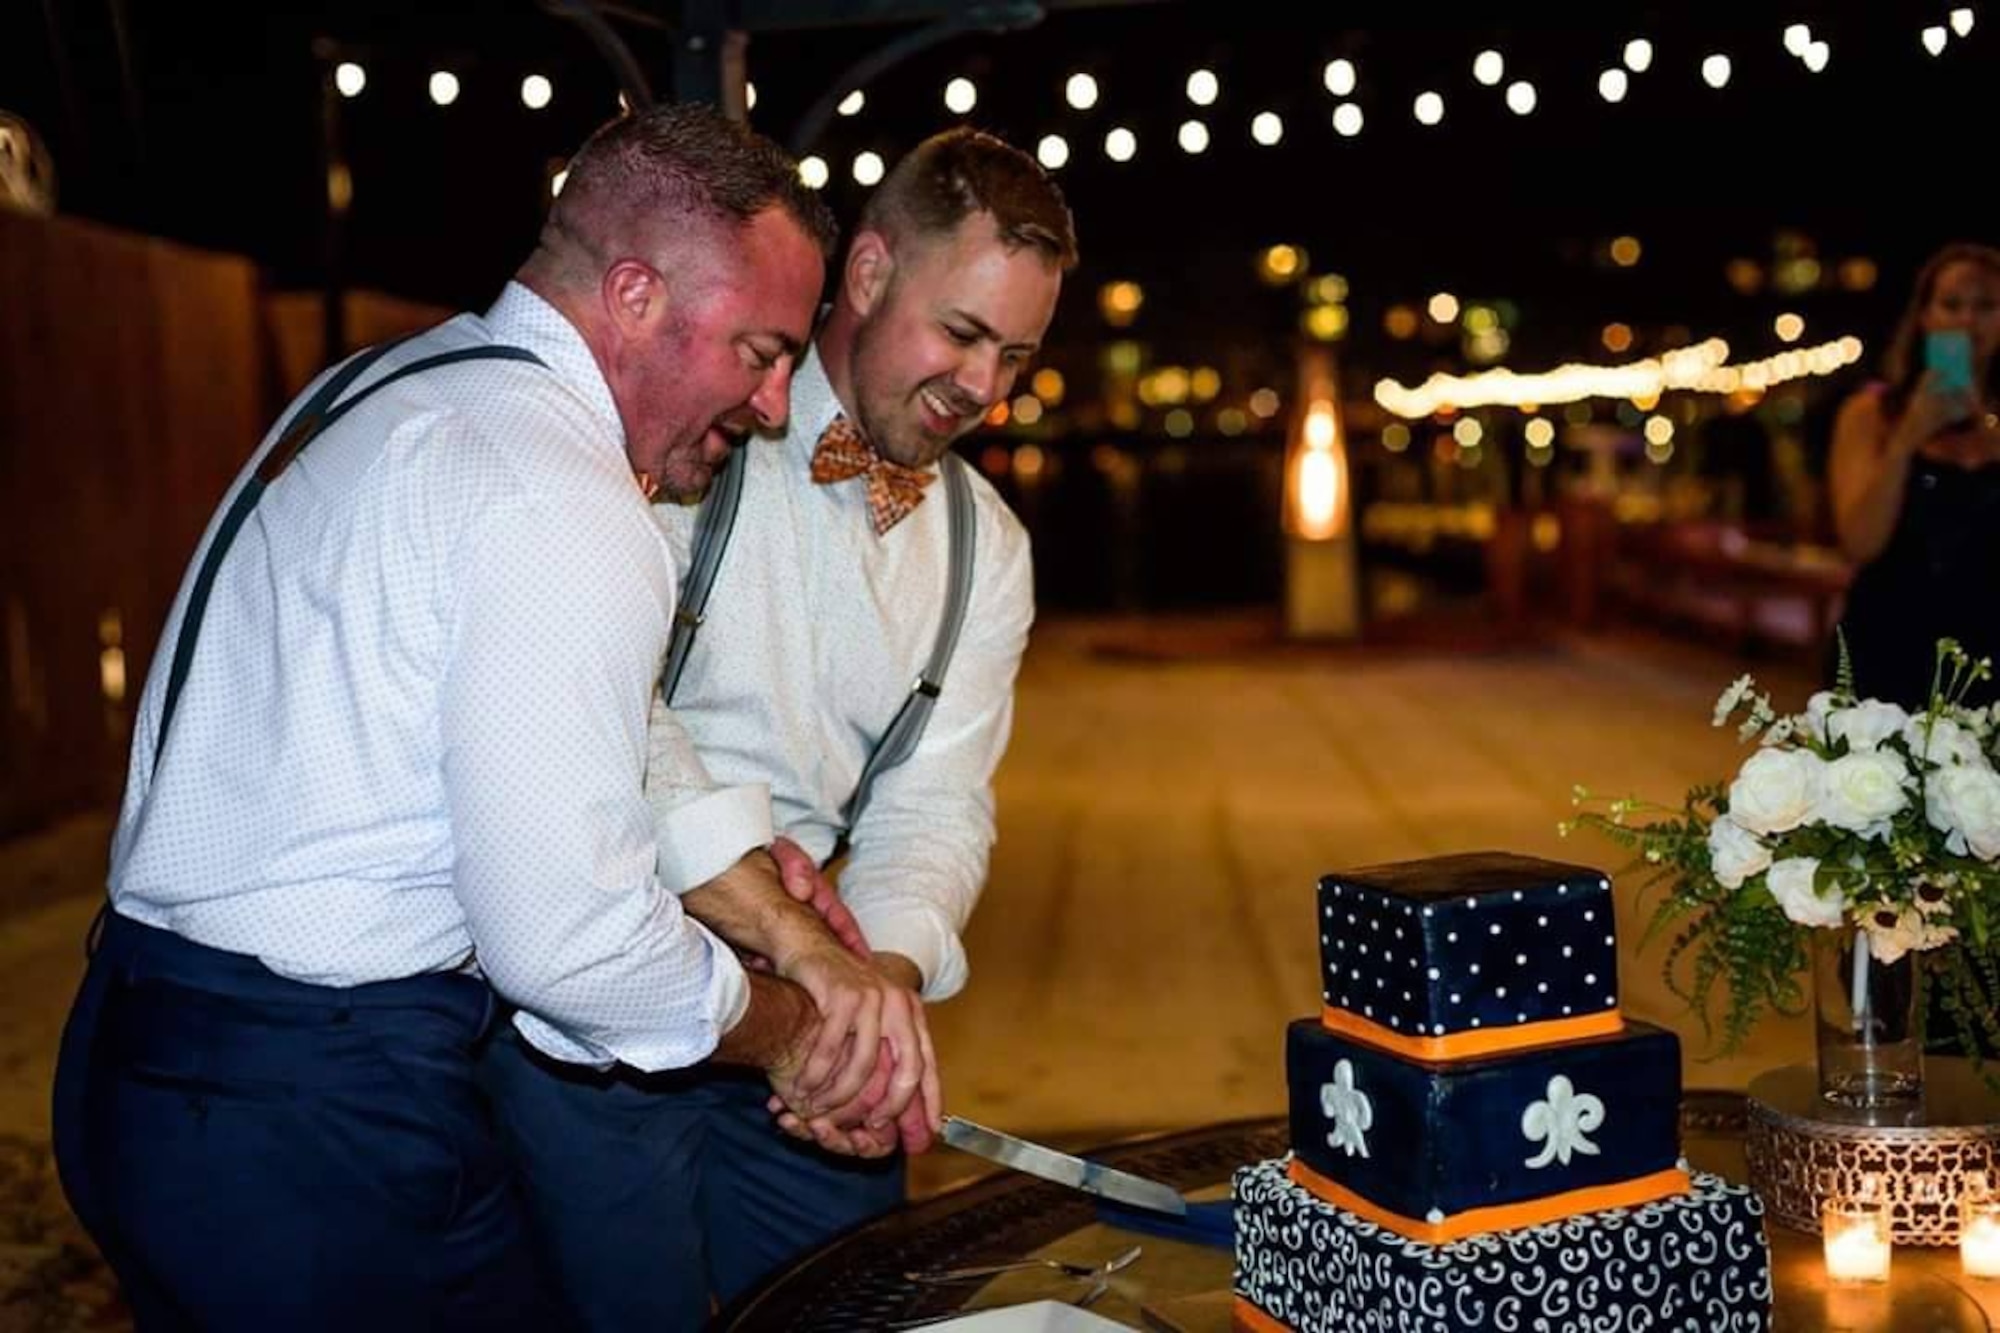 Two men stand next to each other at their wedding. Both are wearing white button-up shirts with suspenders and bowties. It's night in a festive atmosphere and they're slicing into their wedding cake.